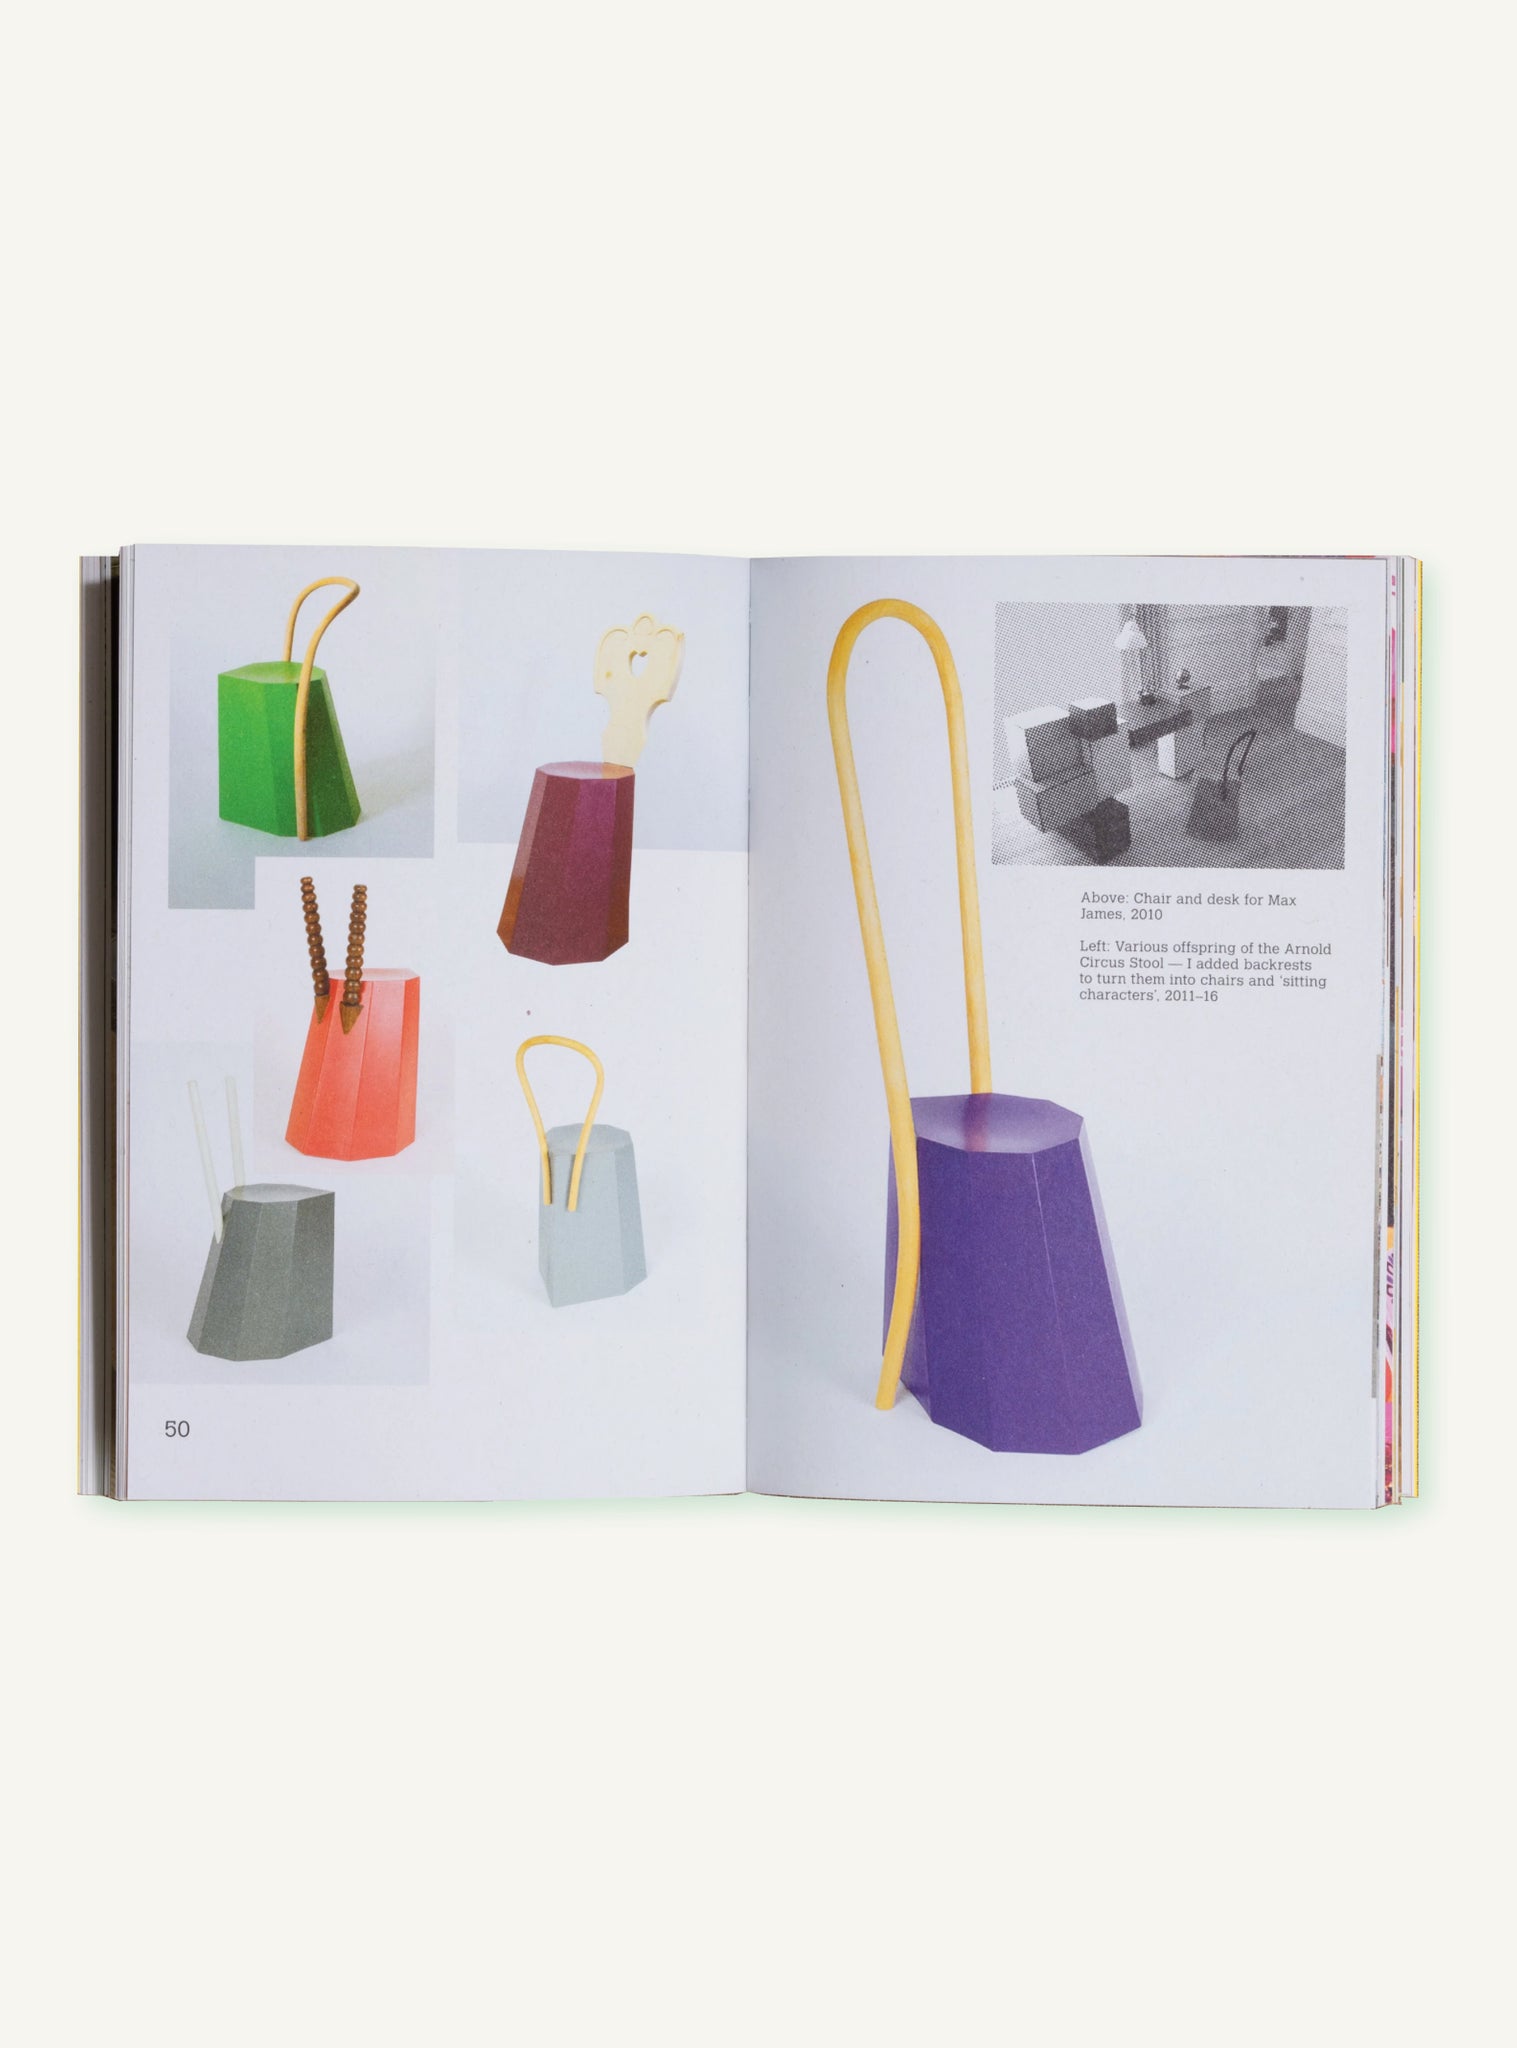 THE ARNOLD CIRCUS STOOL BOOK By Martino Gamper